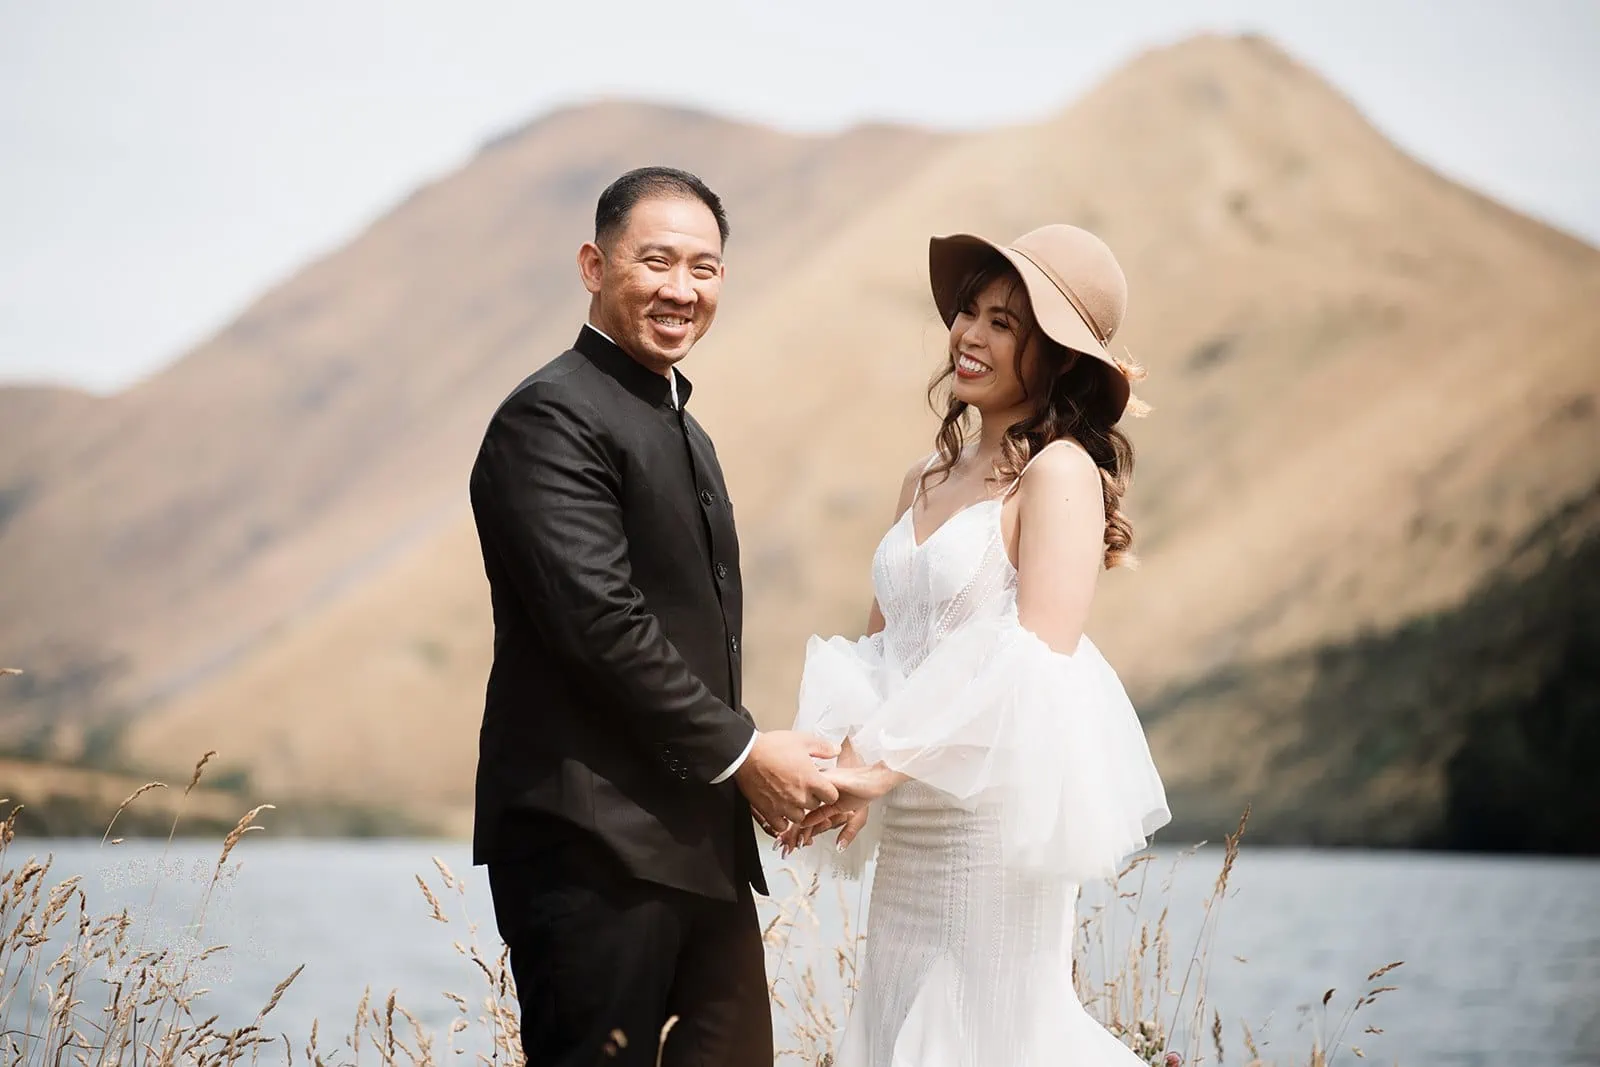 Nhi & Nicholas' Pre-Wedding Shoot with mountains in Queenstown, NZ.